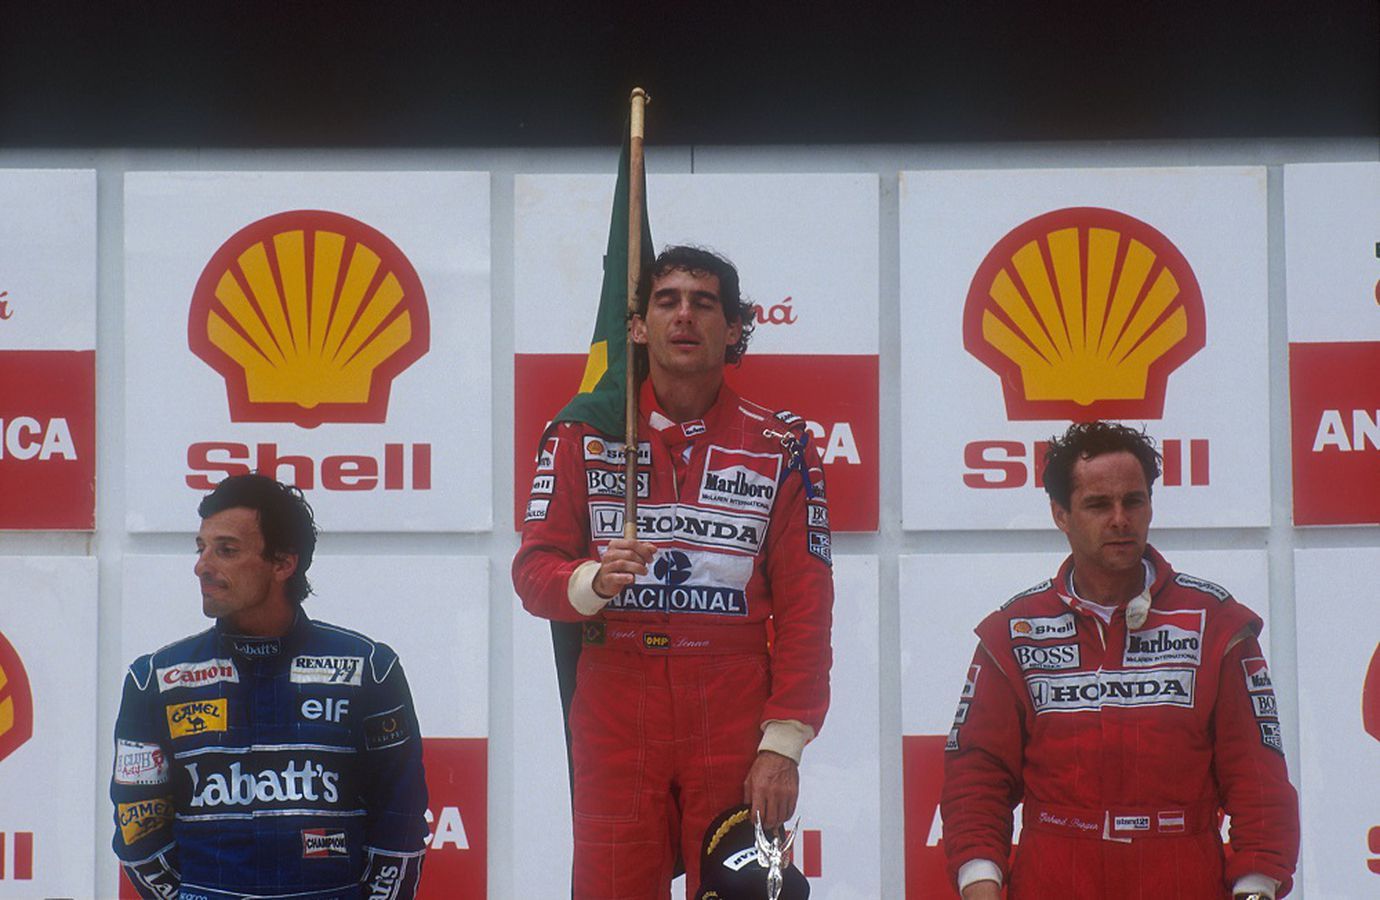 Ayrton Senna celebrates with the Brazilian flag after winning his first Brazilian Grand Prix in 1991